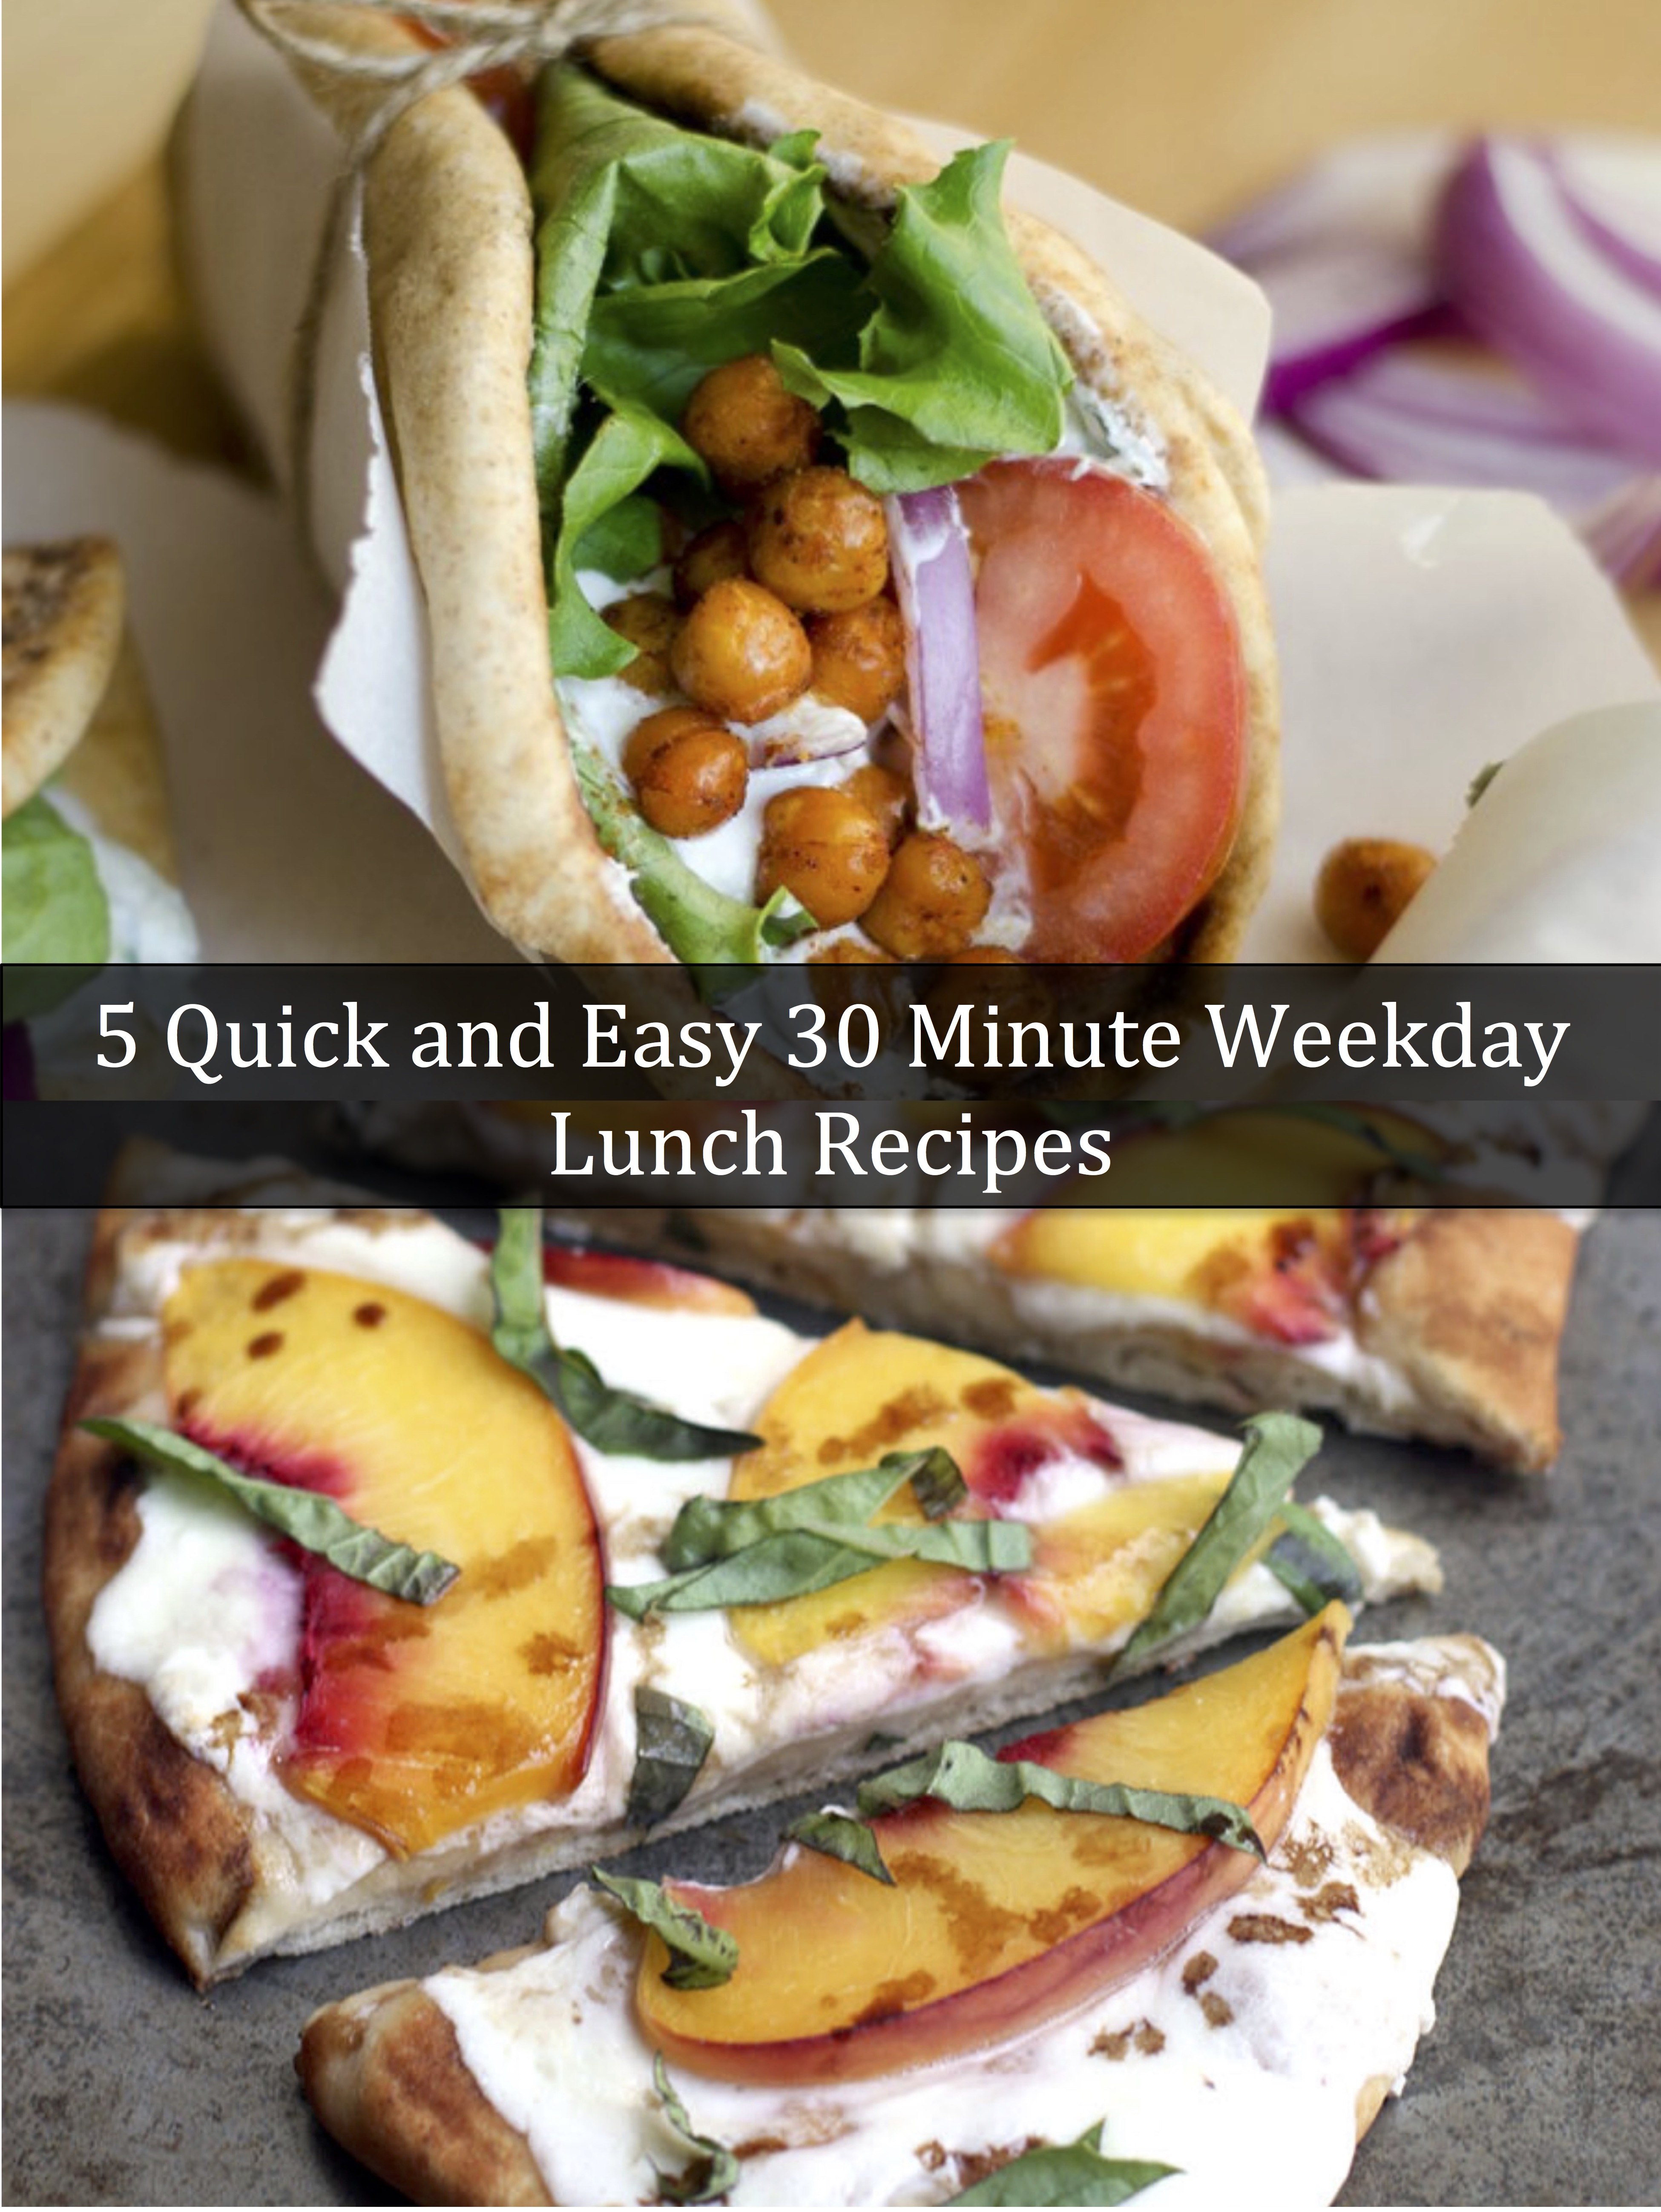 5 Quick and Easy 30 Minute Weekday Lunch Recipes